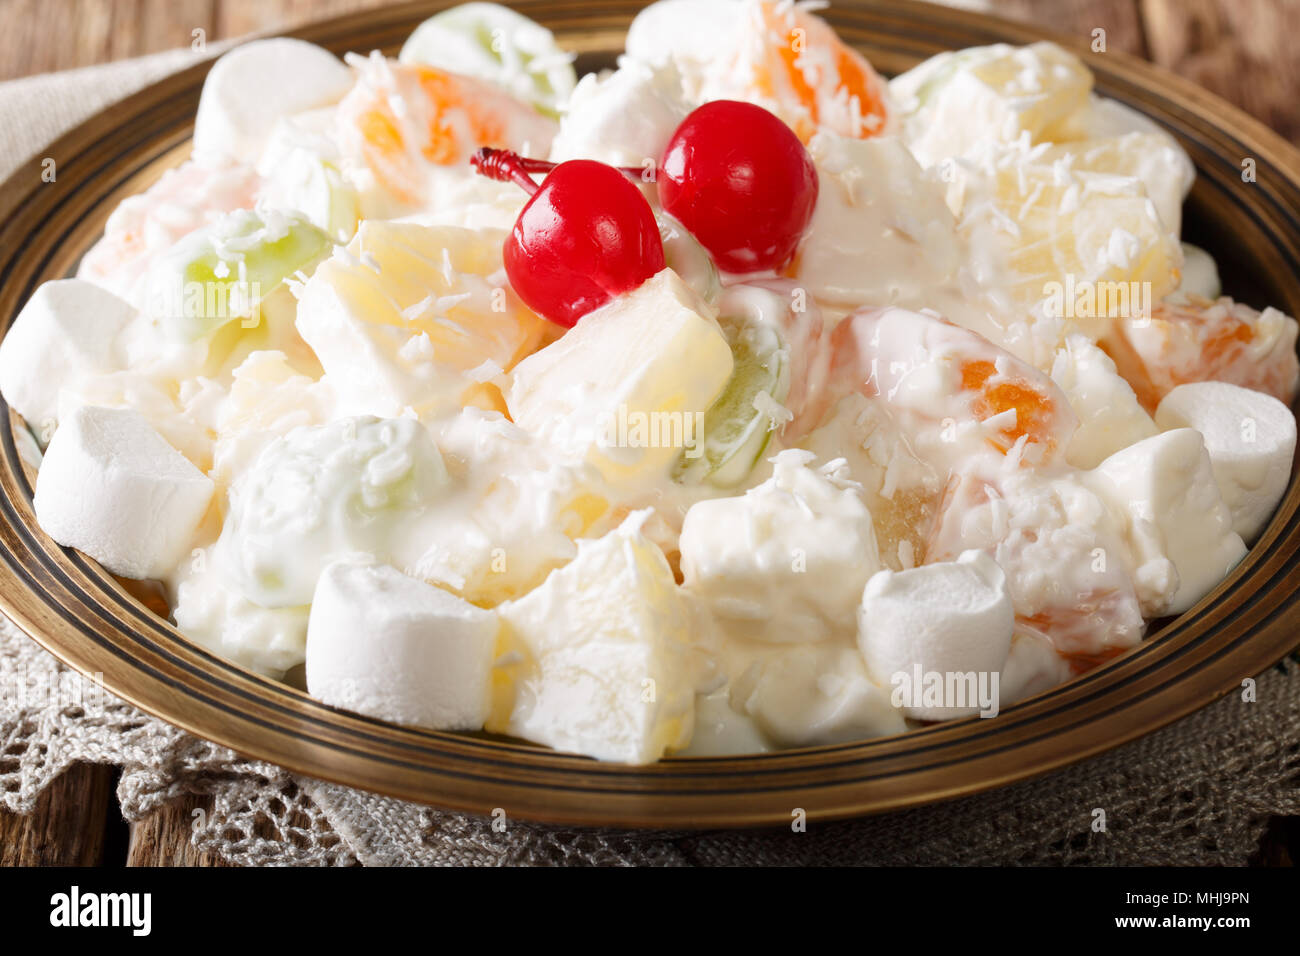 Dessert fruit salad Ambrosia from pineapple, tangerine, grapes and marshmelow with vanilla yogurt close-up on a plate. horizontal Stock Photo